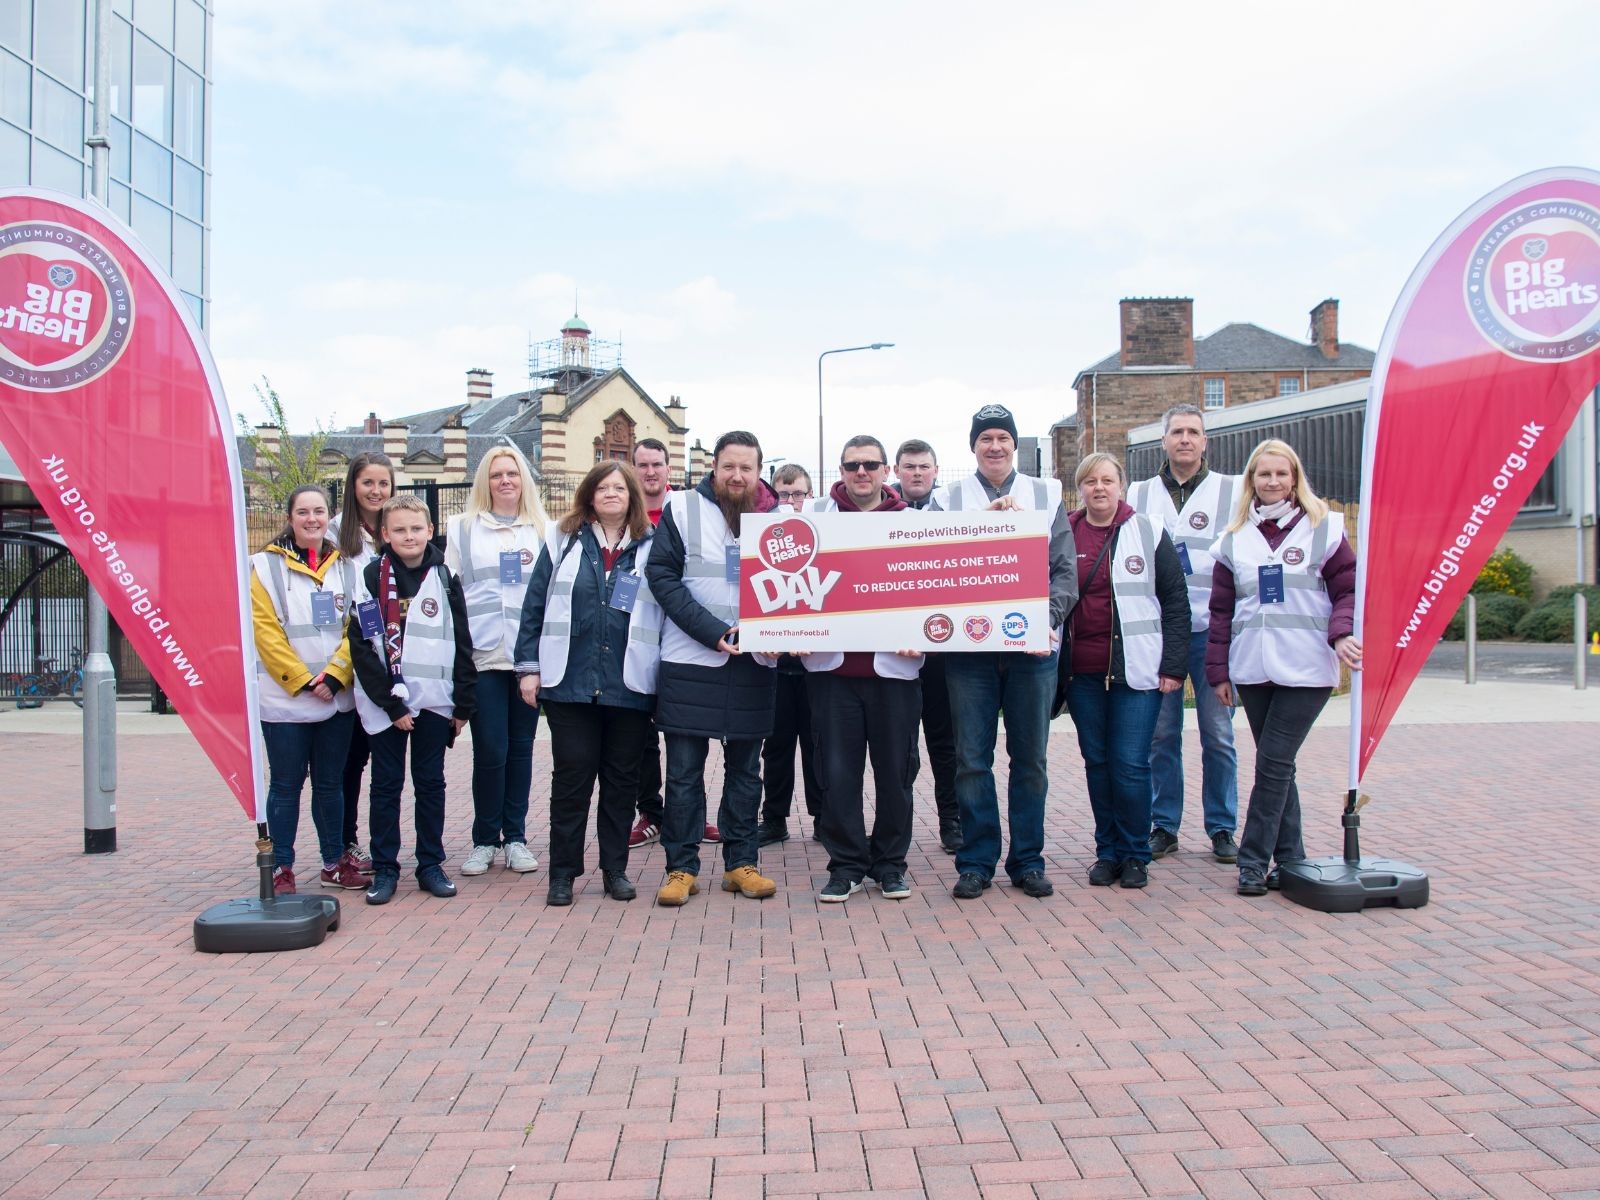  » COME AND FIND OUT MORE ABOUT BIG HEARTS VOLUNTEER OPPORTUNITIES!